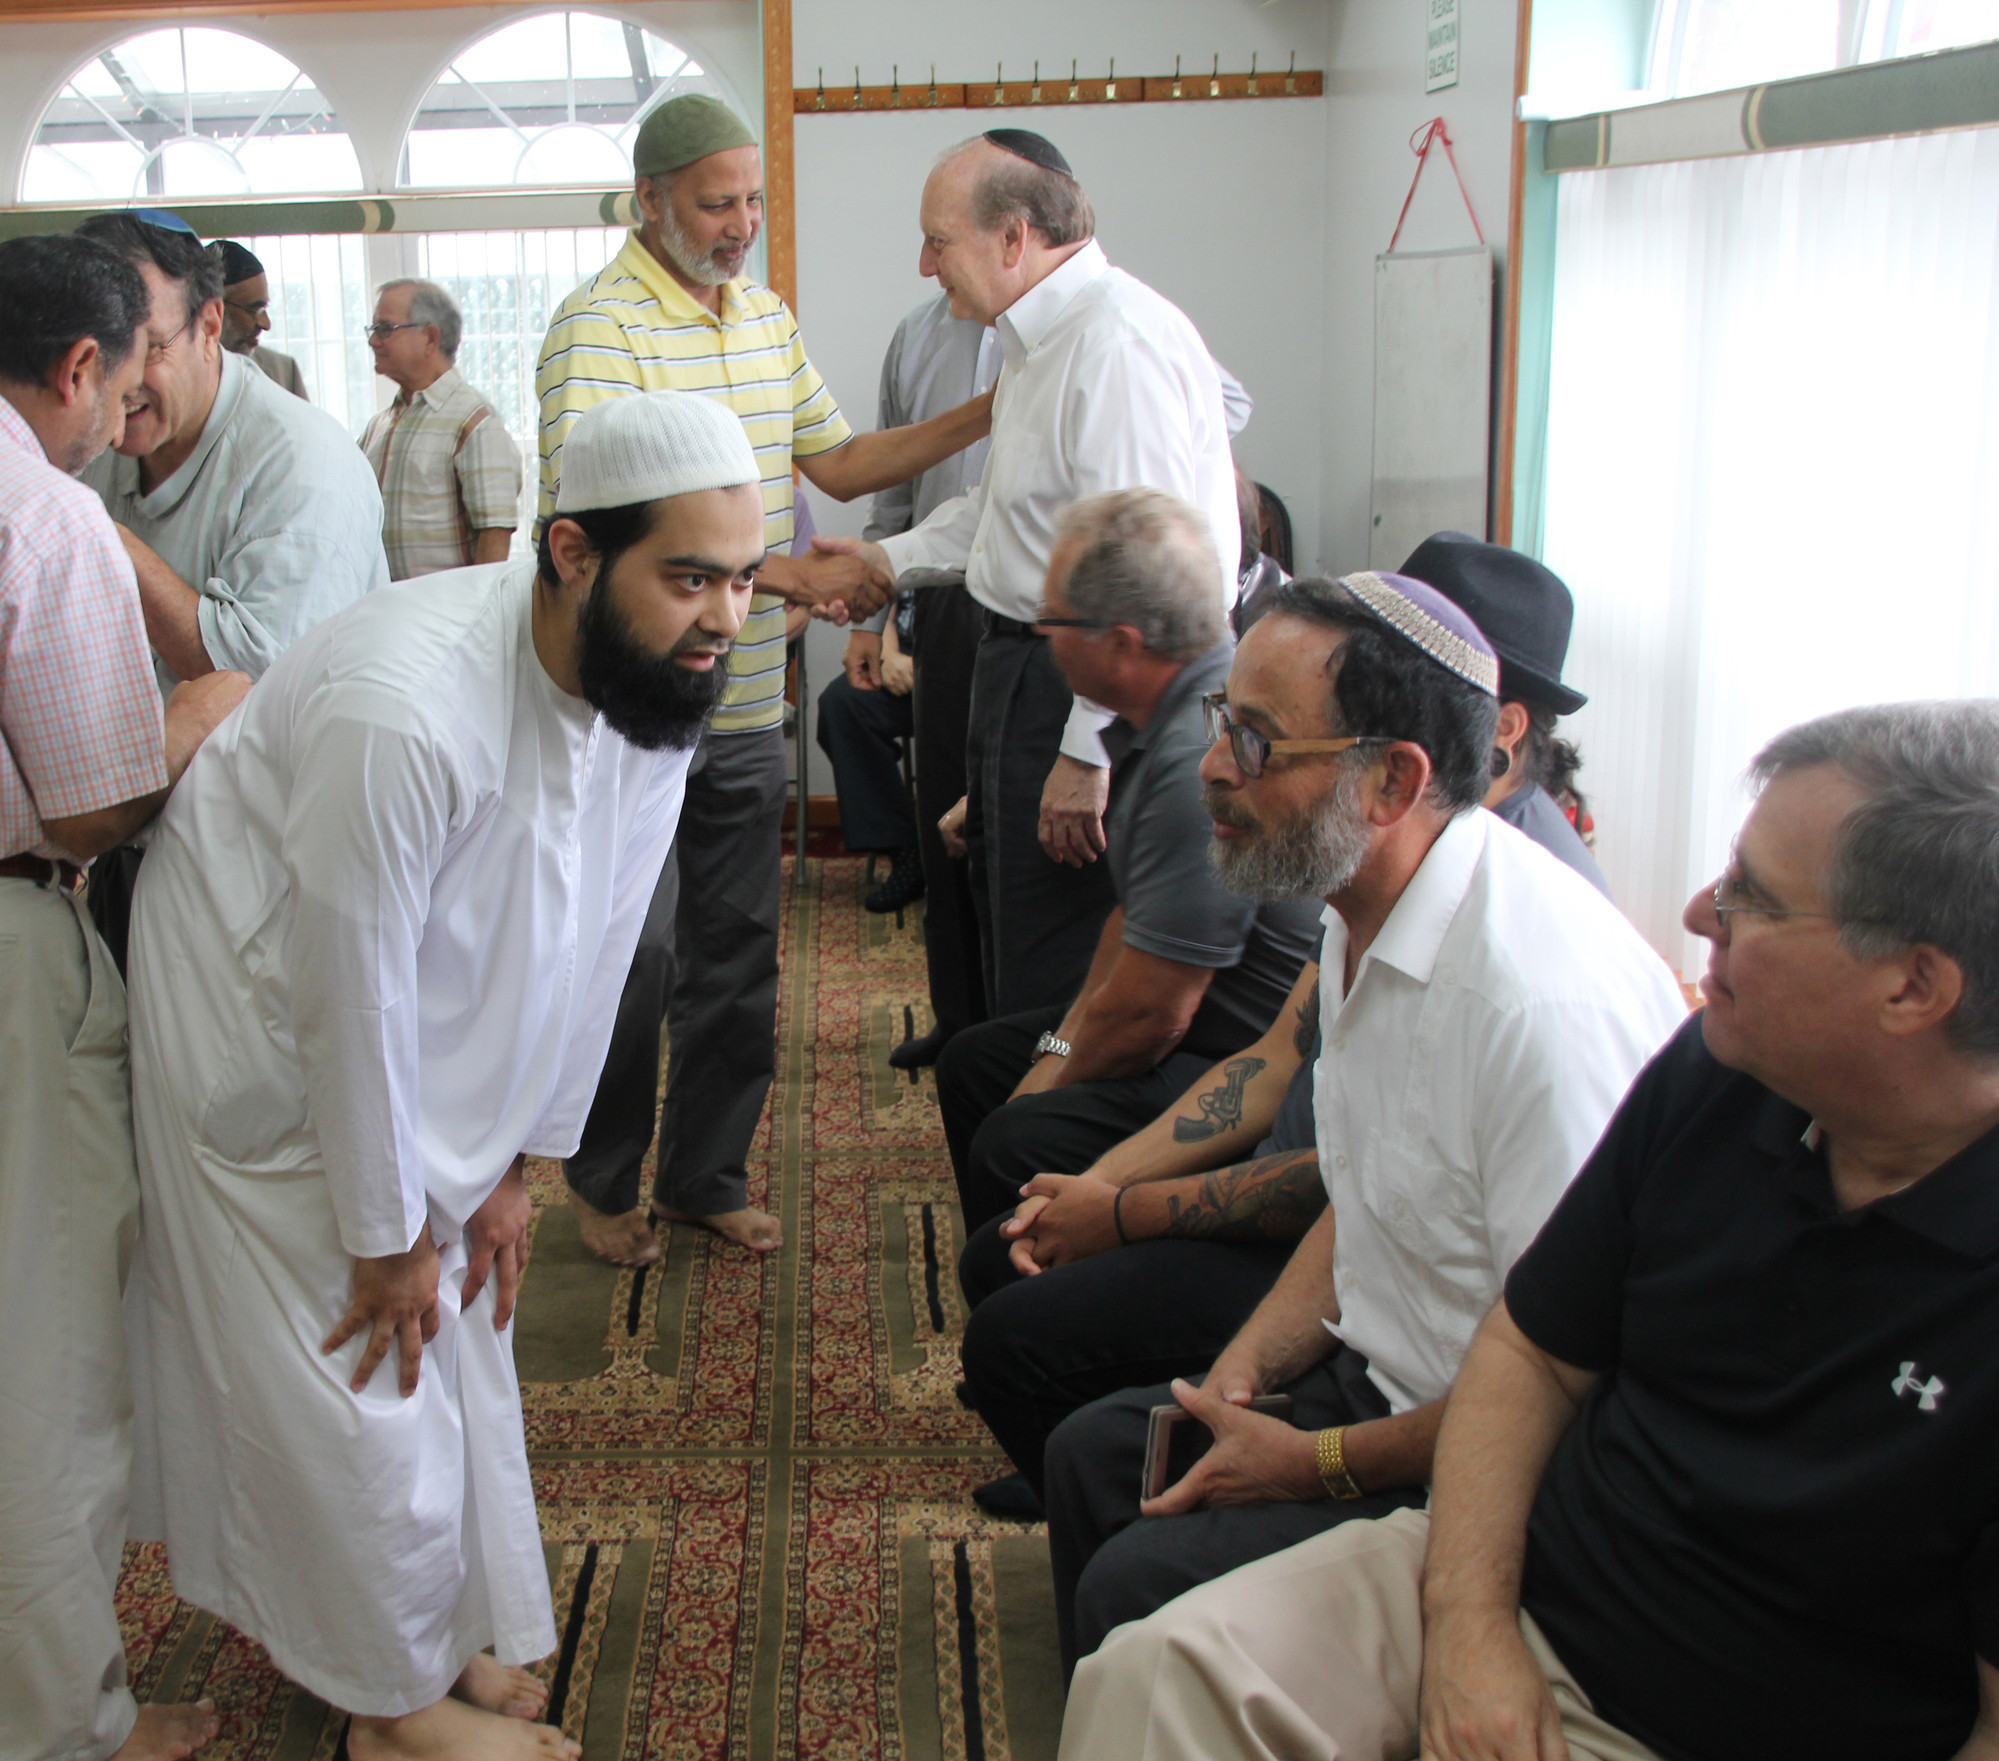 The relationship between the two houses of worship started after Rabbi Howard Gorin met Fahad Qamer, general secretary of the executive committee of Jaam’e Masjid.